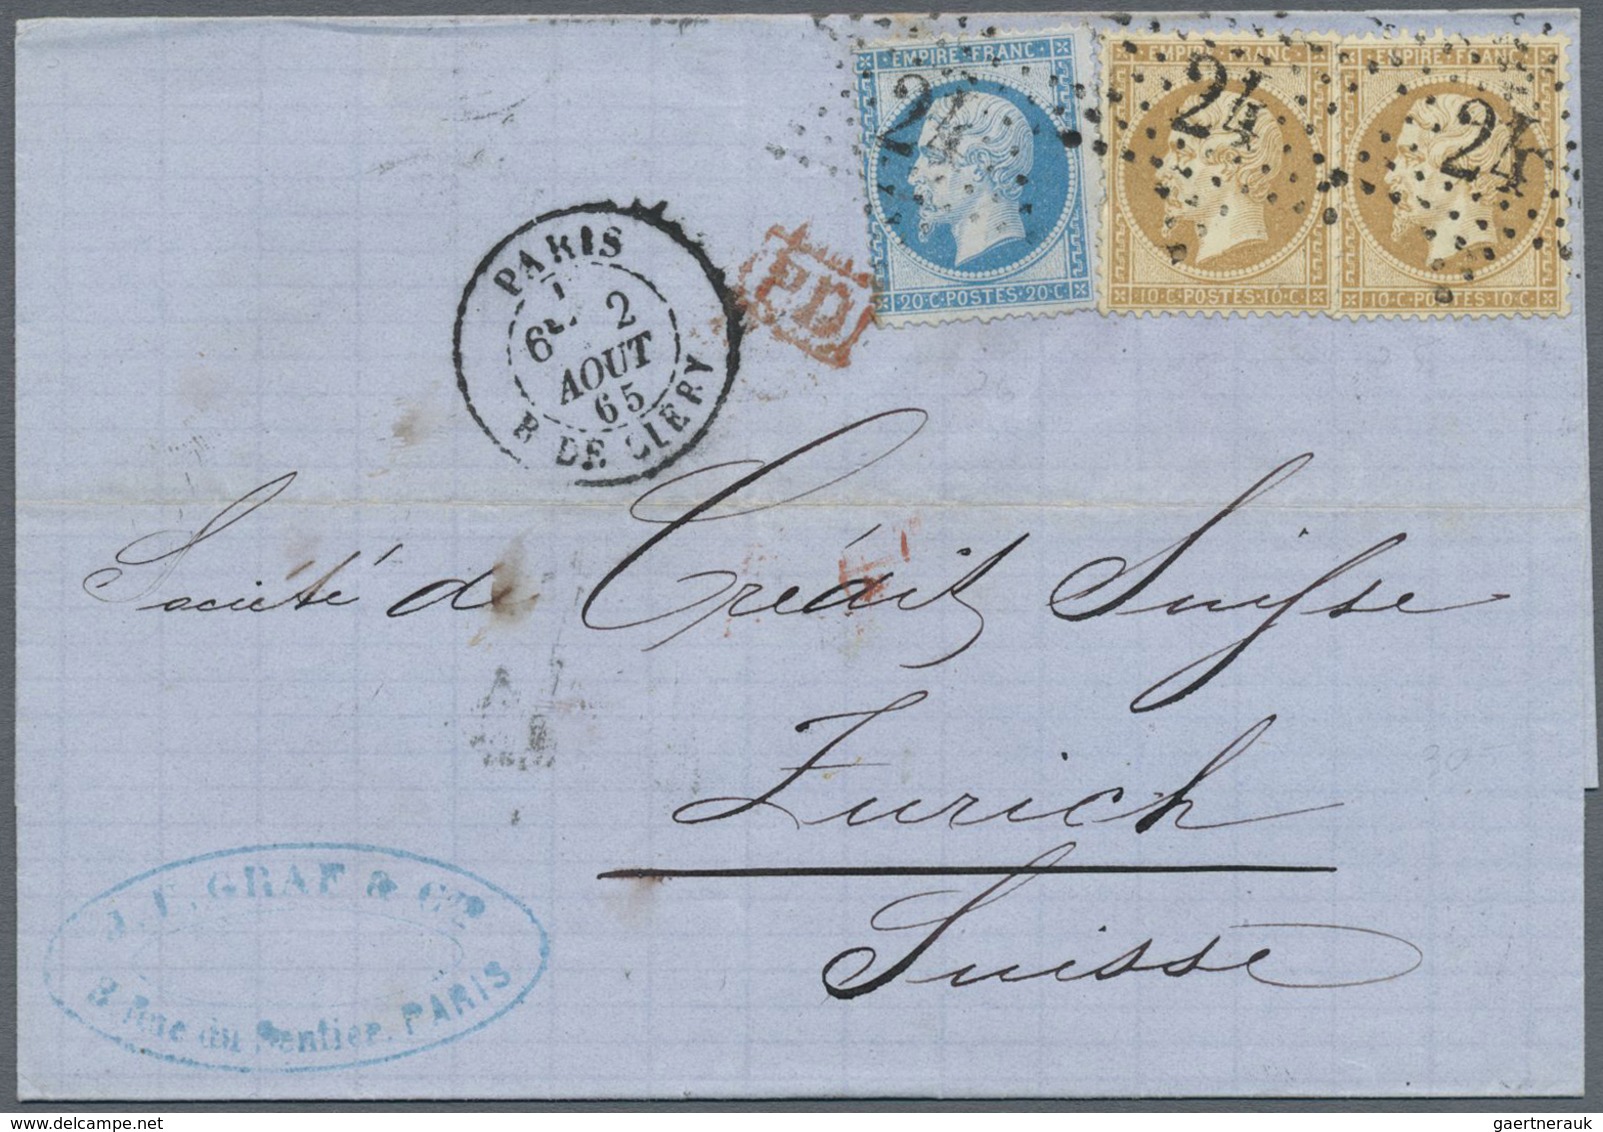 Br Frankreich - Stempel: 1856/1875, ETOILE/ETOILE AVEC NUMERO, group of apprx. 56 entires with franking